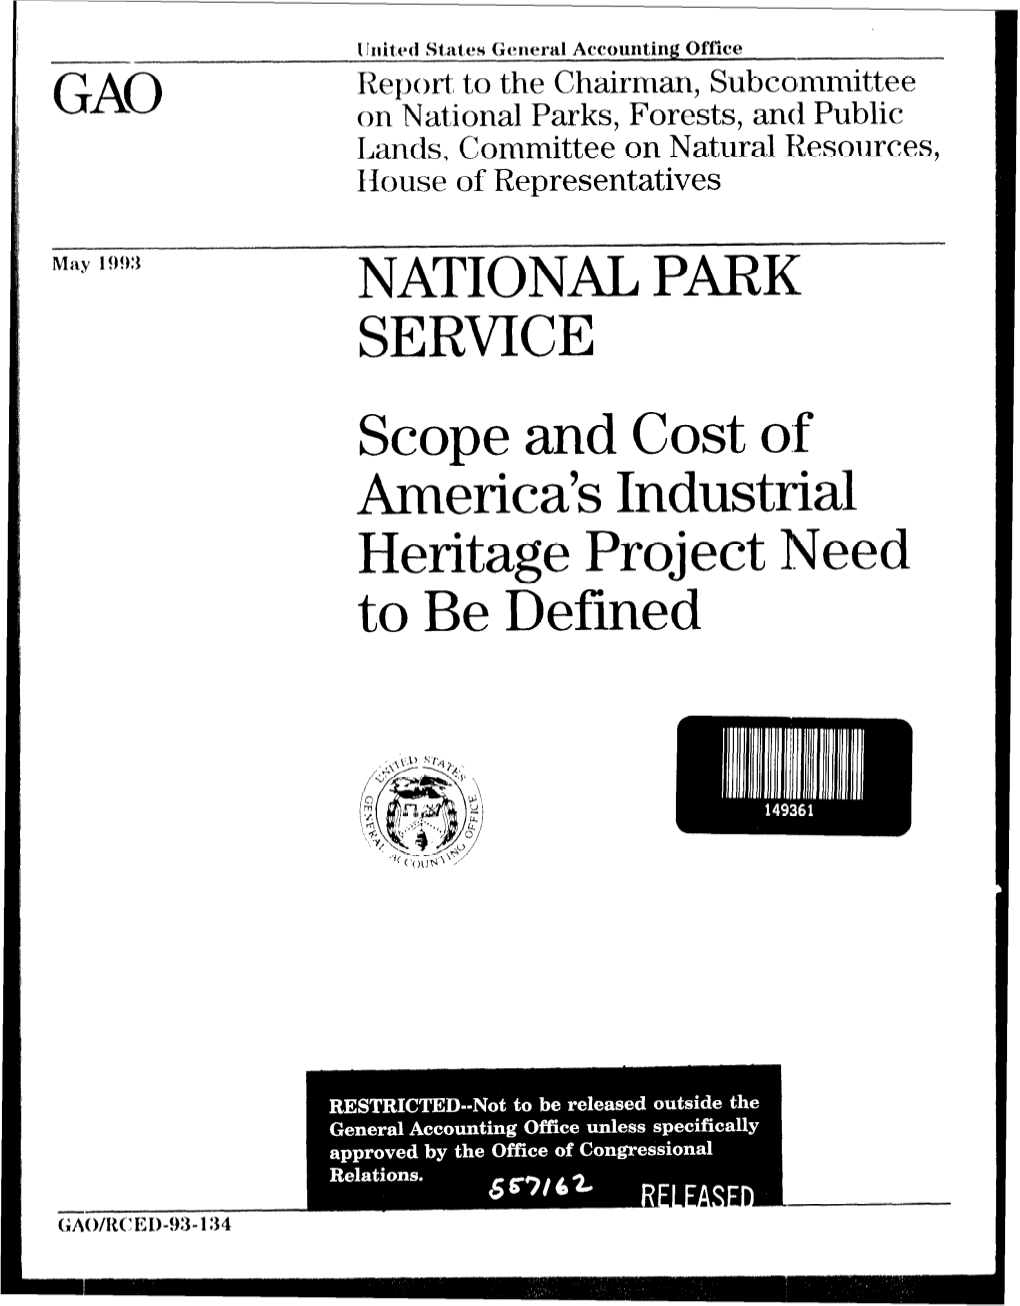 Scope and Cost of America's Industrial Heritage Project Need to Be